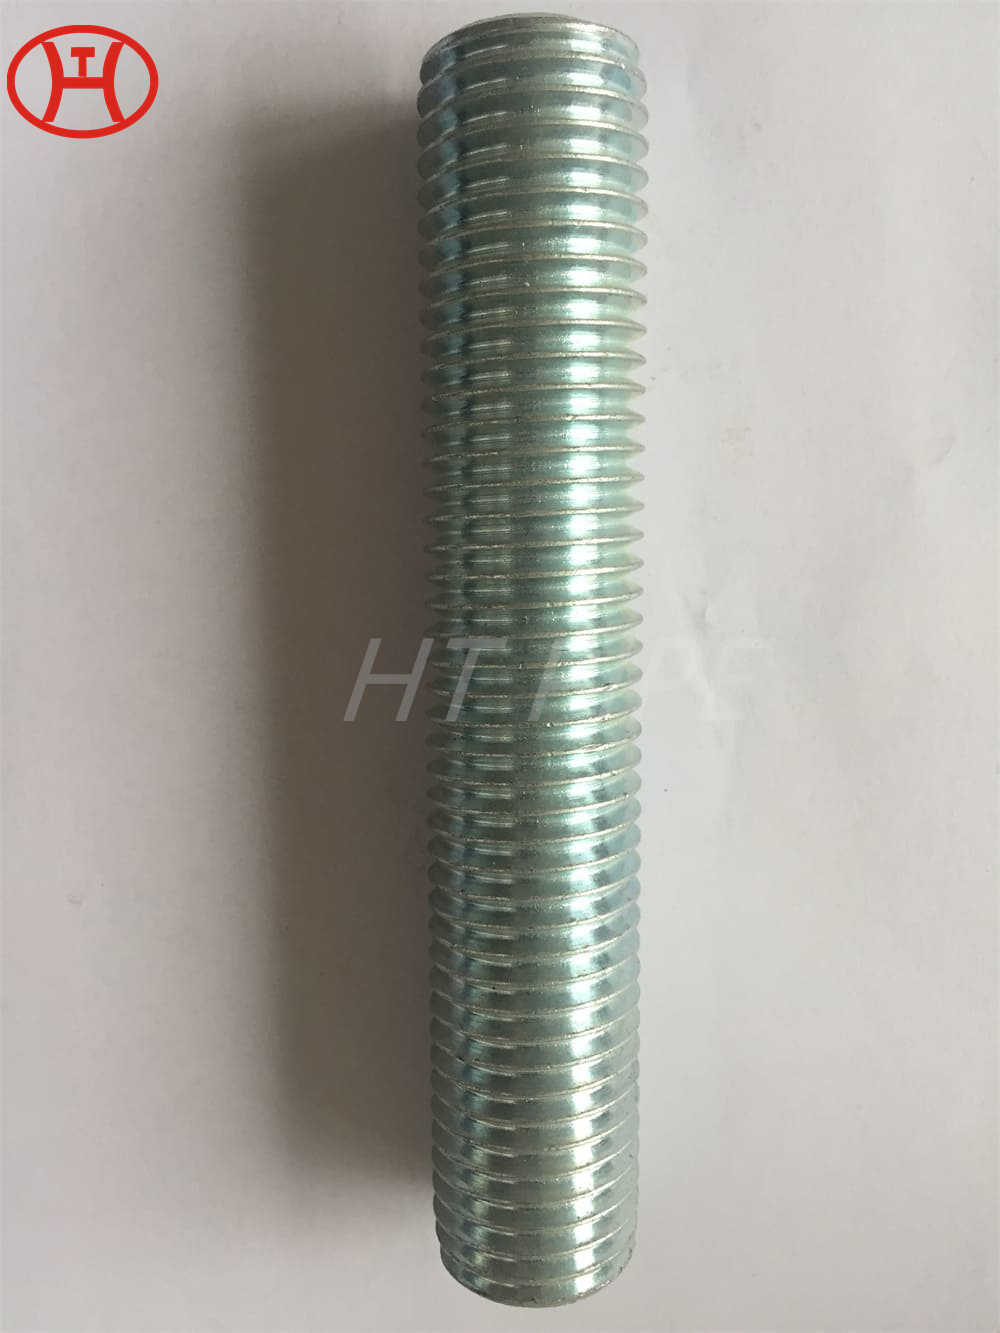 DIN976 UNS N08825-Incoloy 825 full thread Nature Nickel Alloy flat head hex bolt 3-8 hex bolt Incoloy 825 hex bolt